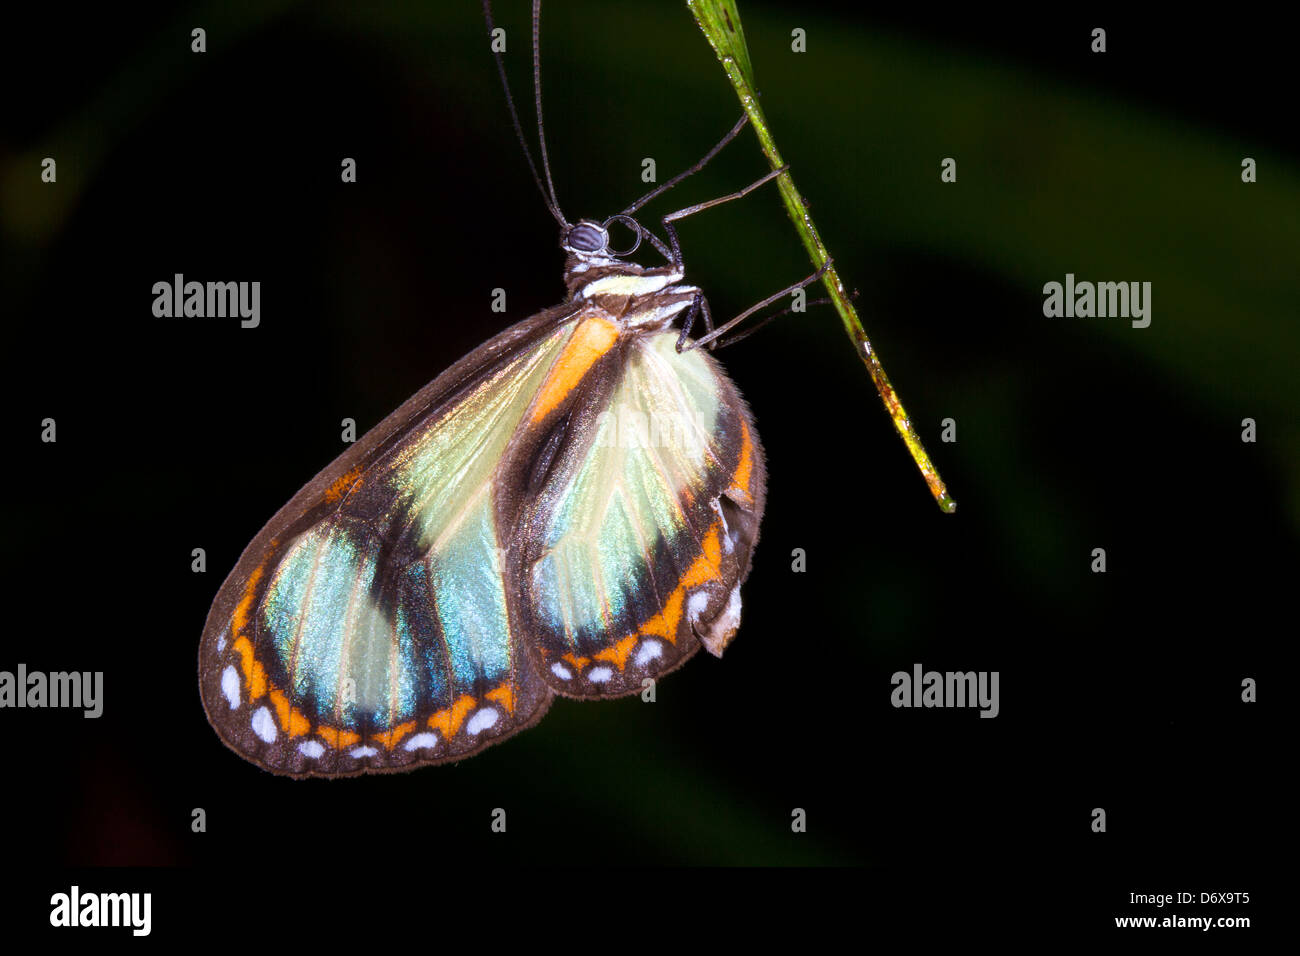 Transparent ithomine butterfly roosting on a leaf in the rainforest at night Stock Photo